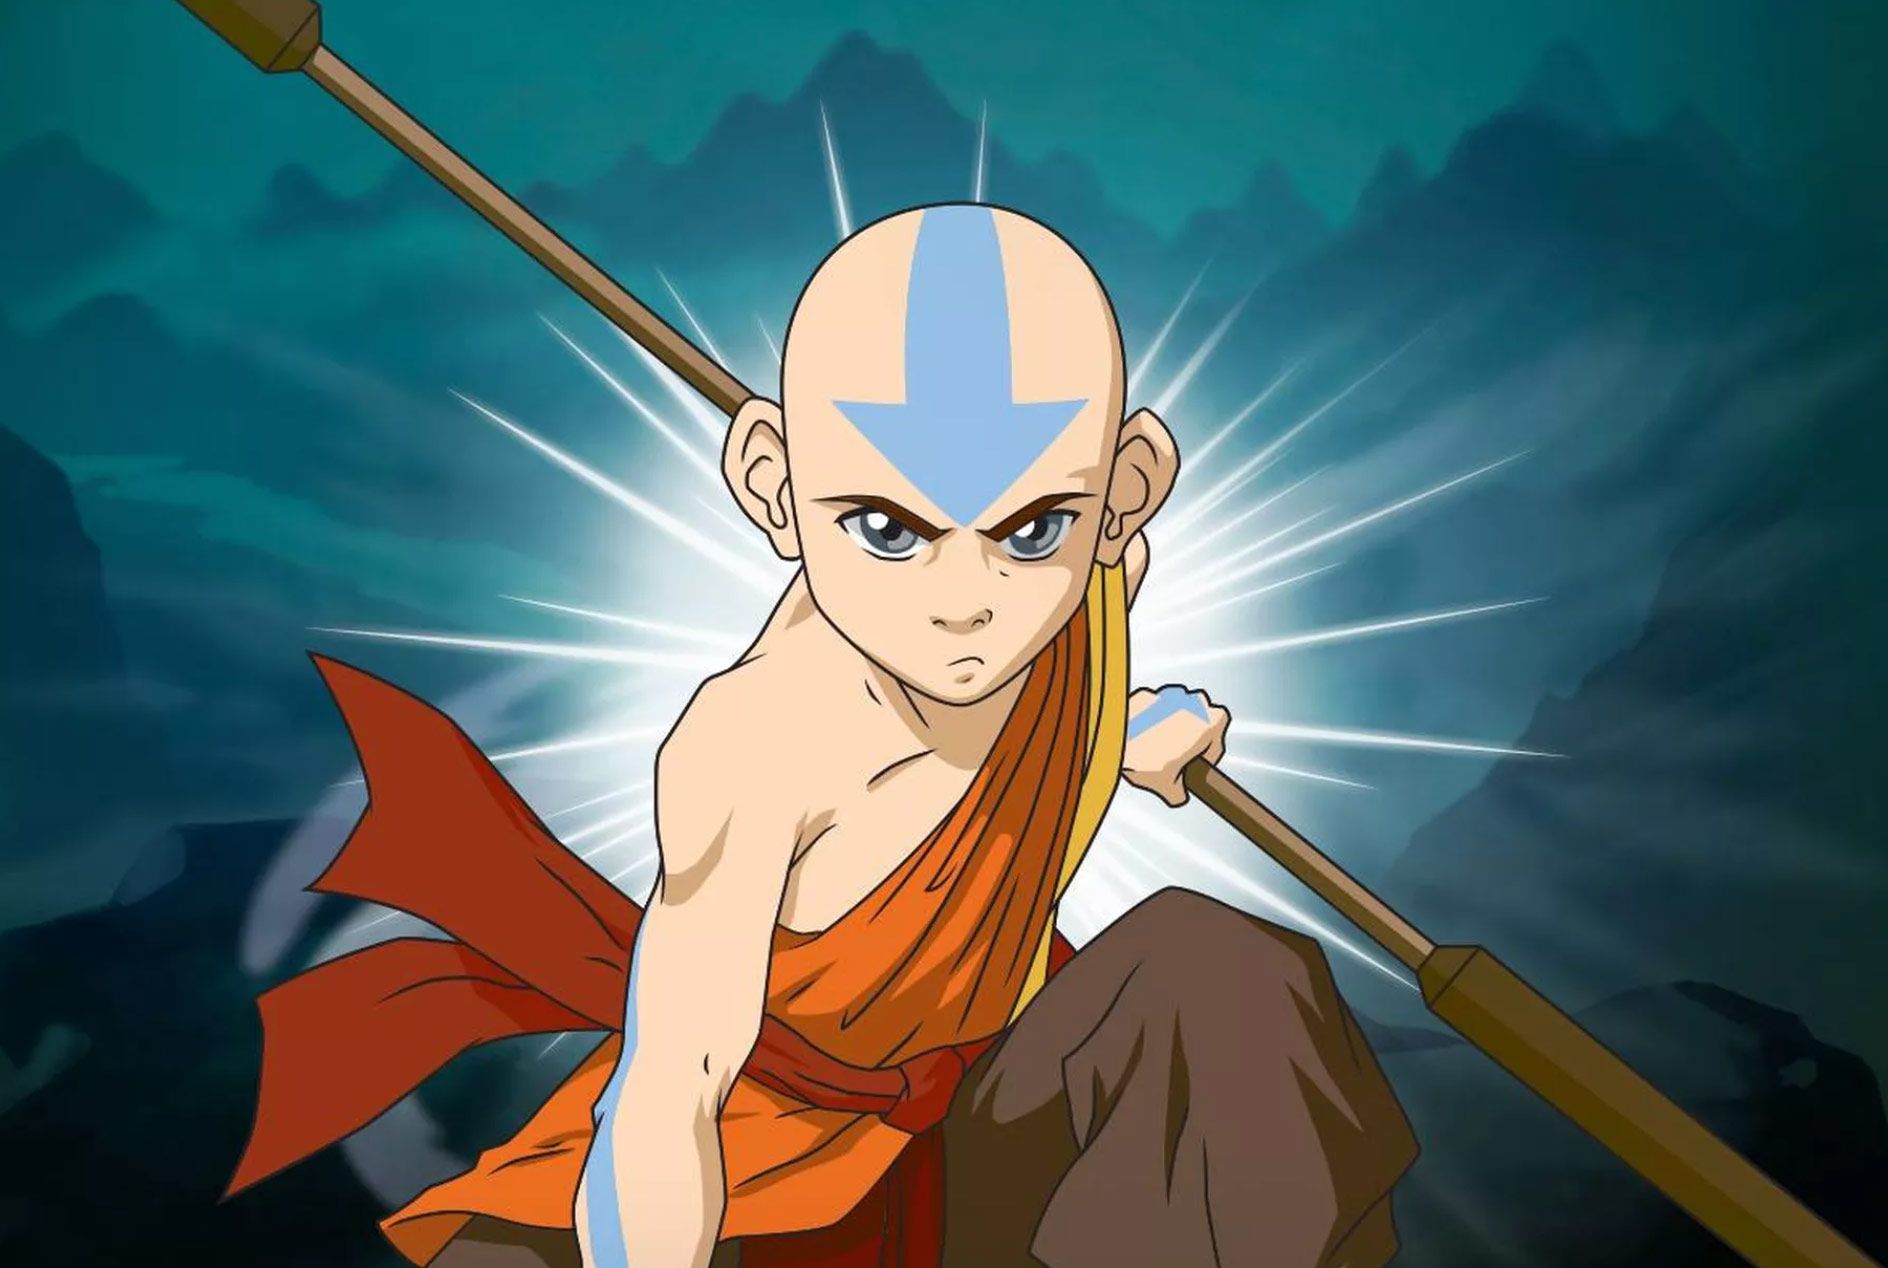 Avatar The Last Airbender Live Action Series To Stream On Netflix Soon   XSM